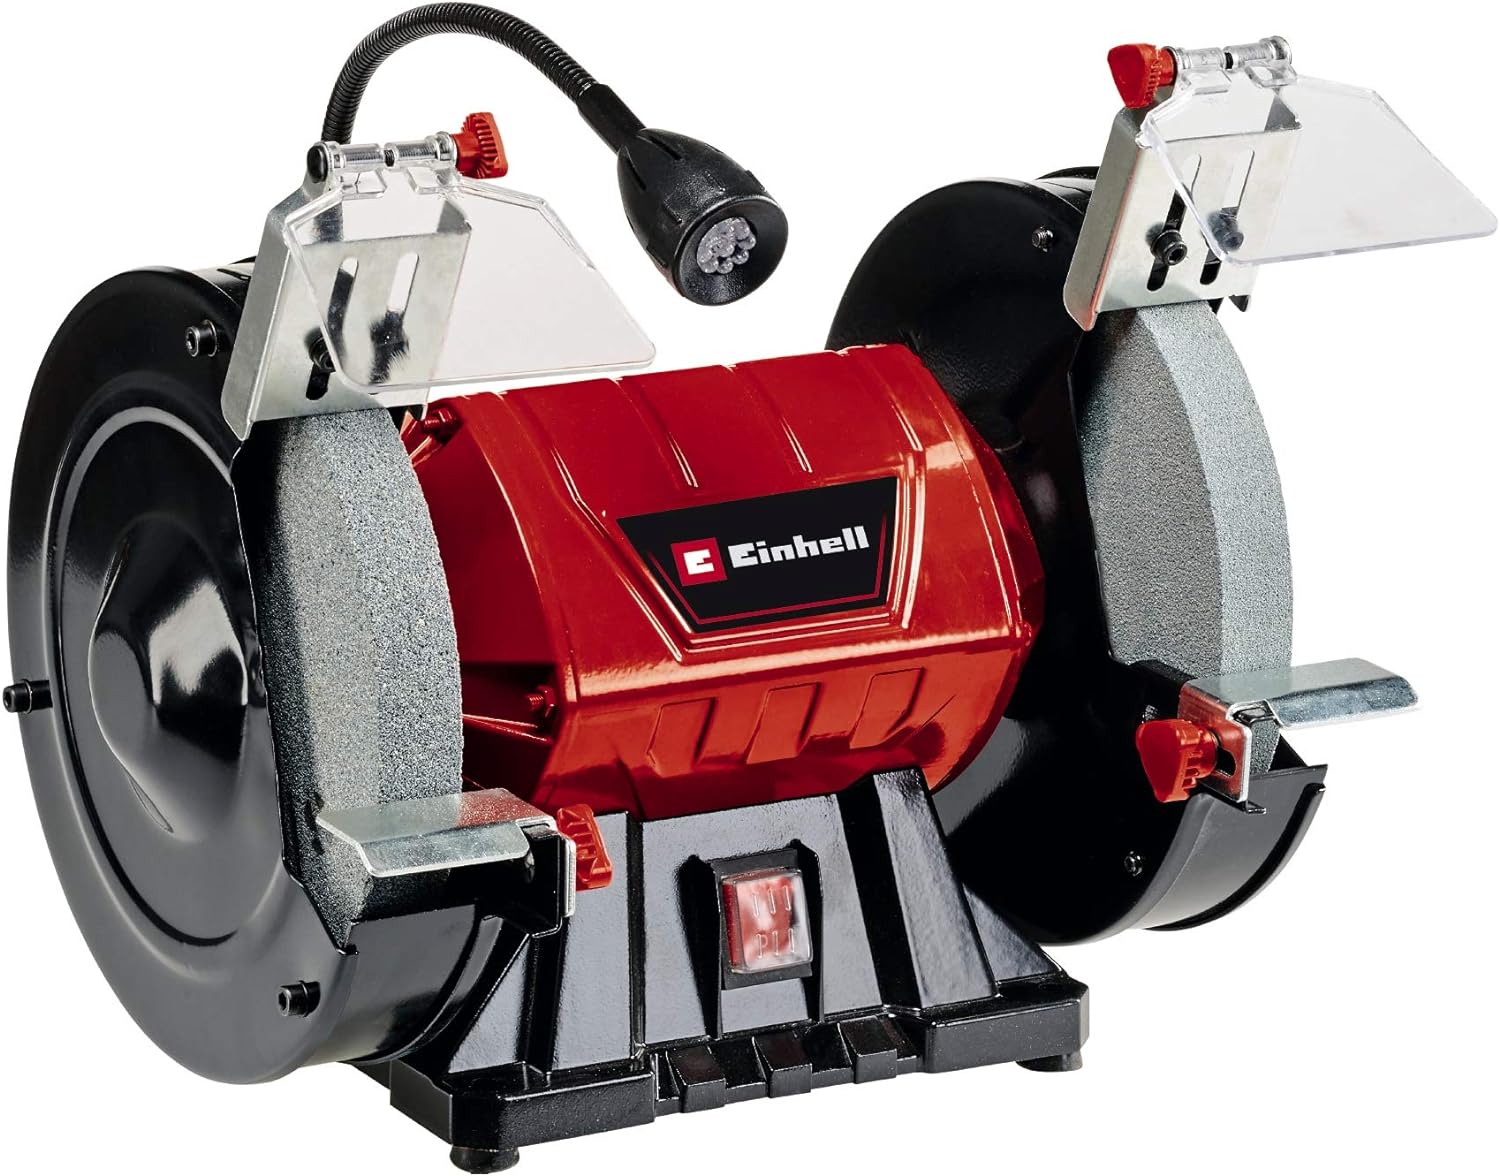 Einhell TH-BG 200L Bench Grinder - 2980 RPM, 200mm x 16mm Coarse and Fine Grinding Wheels (K36/K60) - Electric Bench Grinder Polisher for Grinding, Polishing and Sharpening